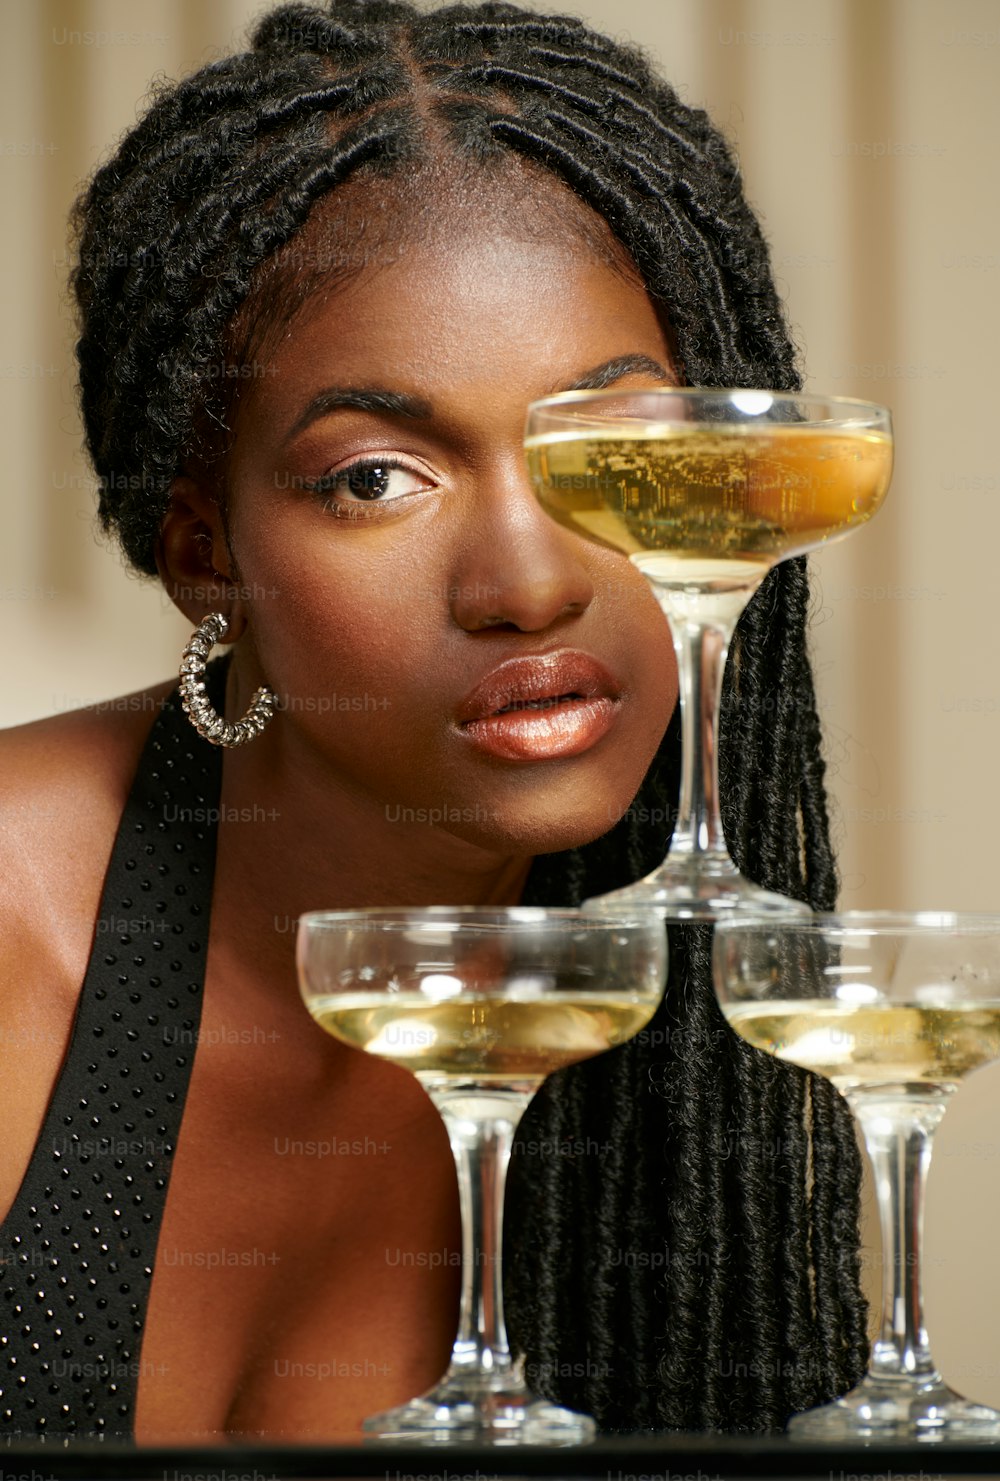 a woman sitting at a table with three glasses of wine